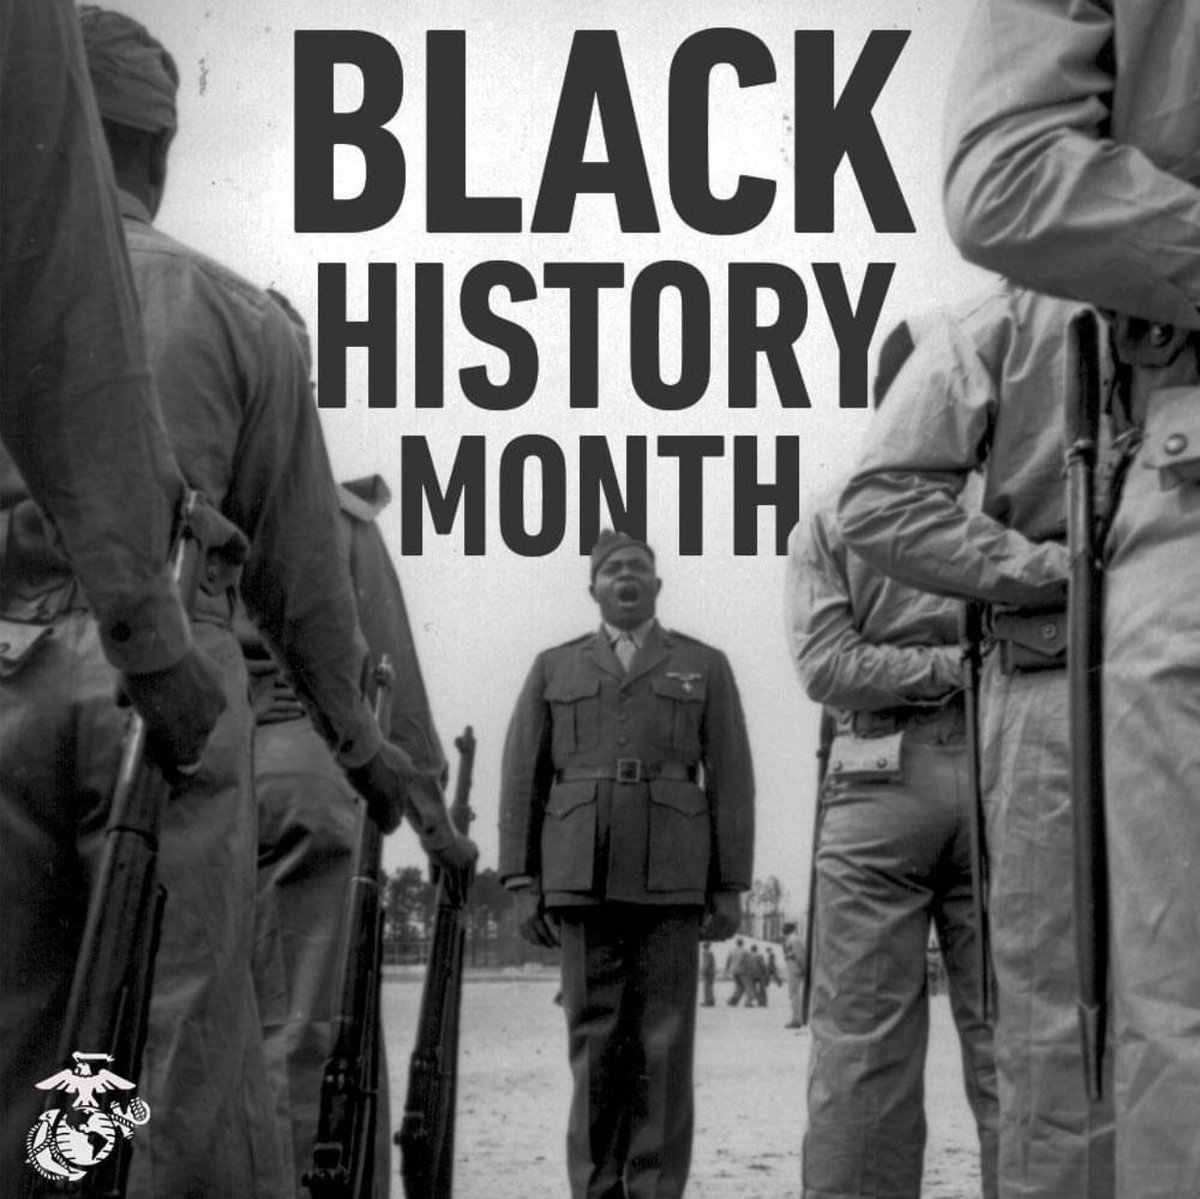 During Black History Month, the we proudly commemorate the service and legacy of all African Americans who have served in our ranks. Recognizing their resilience, leadership and courage, we honor the role Black Marines played in shaping our Corps into the force it is today.